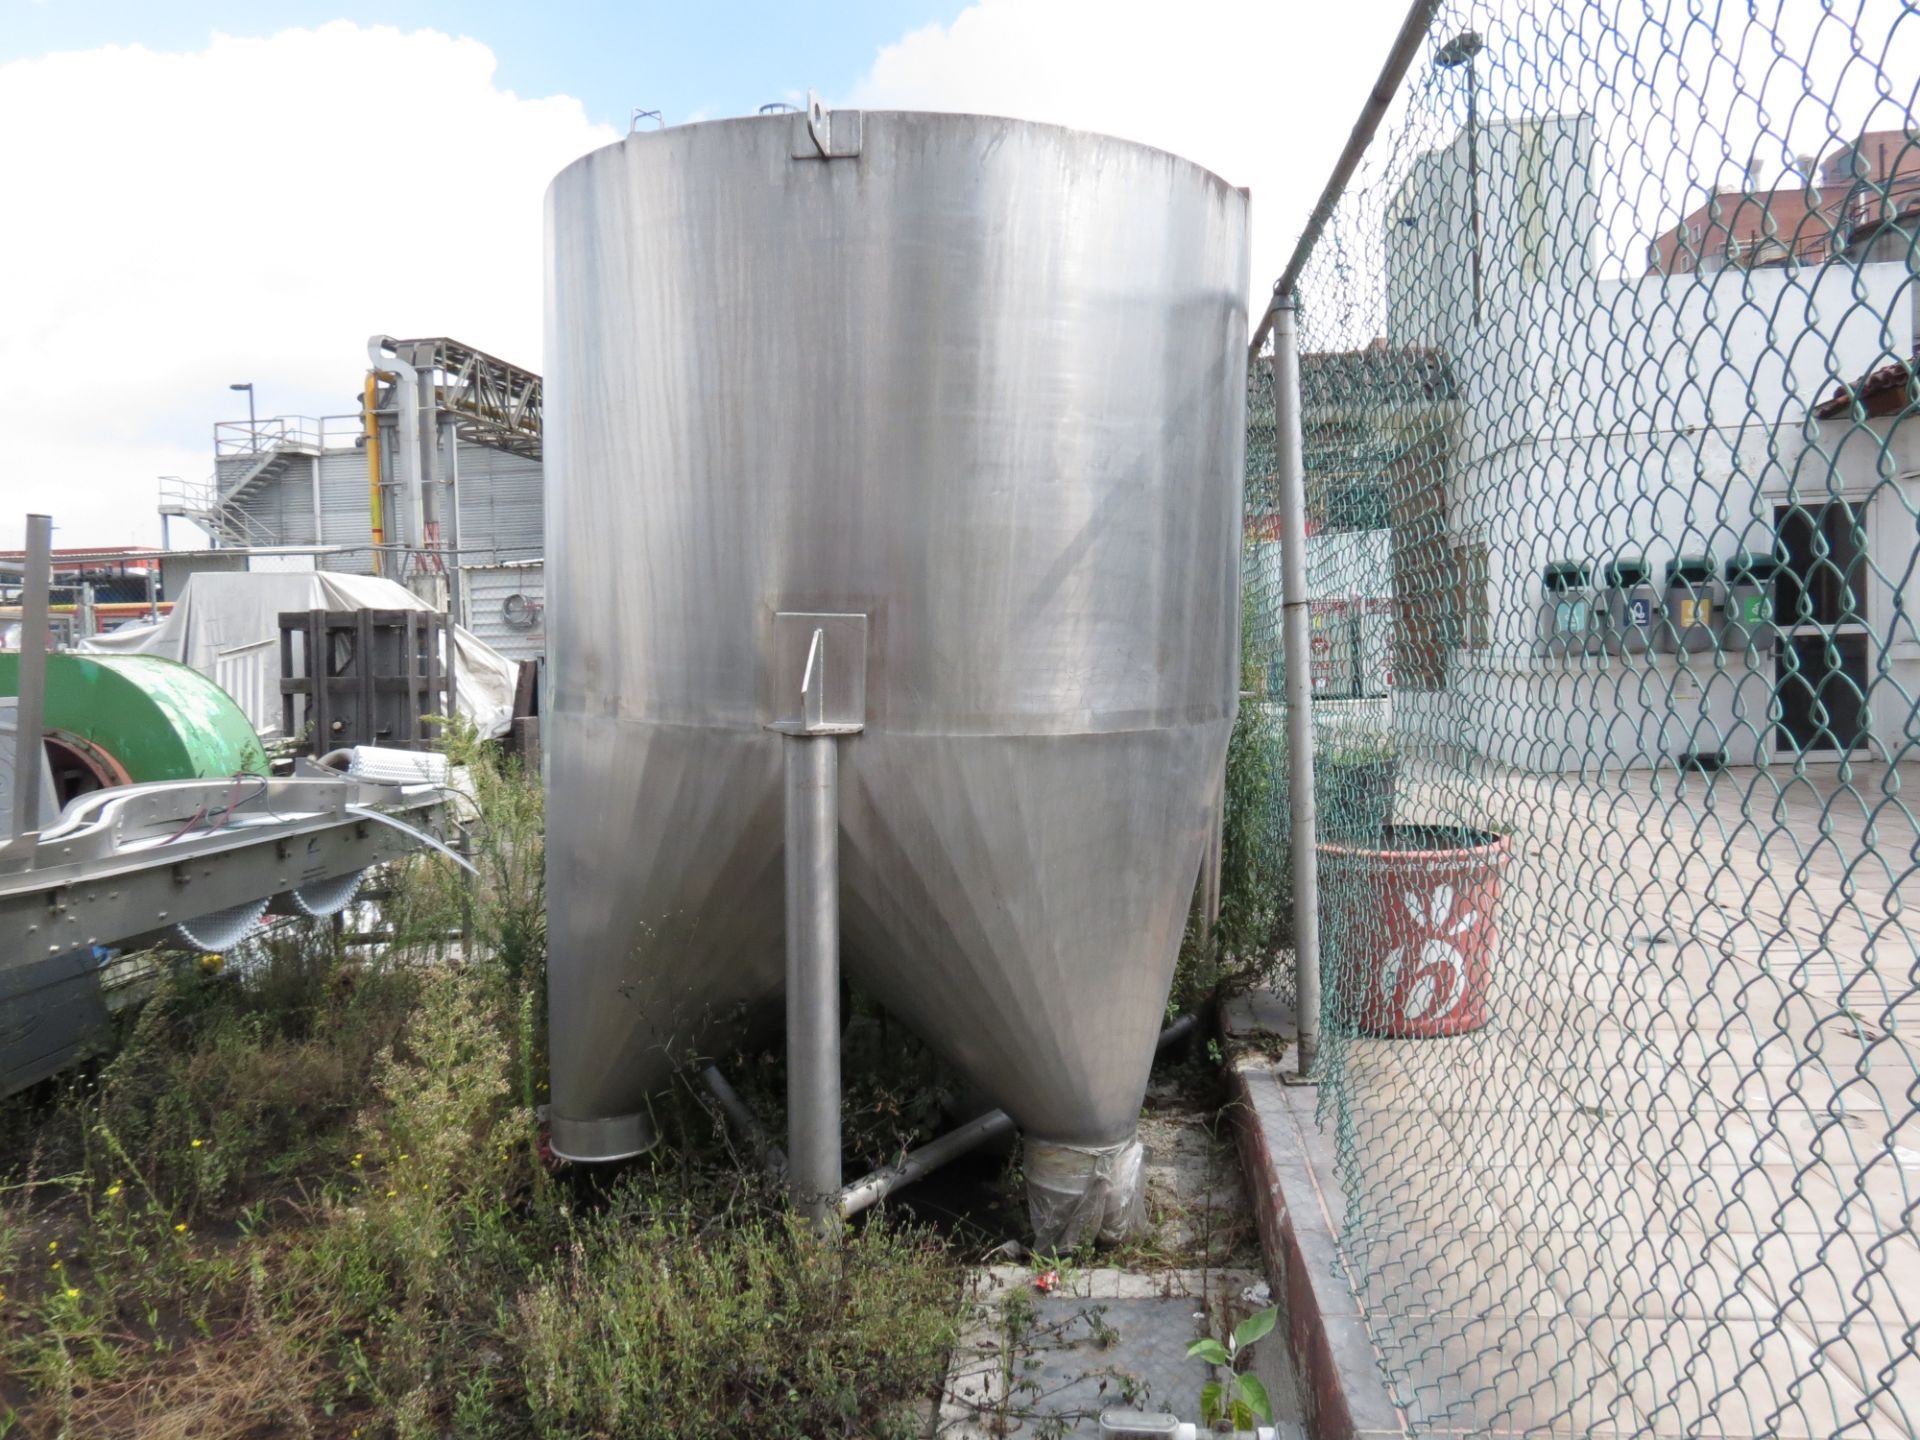 Stainless Steel Tank of 1.93 m in diameter, Includes Strong Parts conveyor belt. - Image 8 of 8